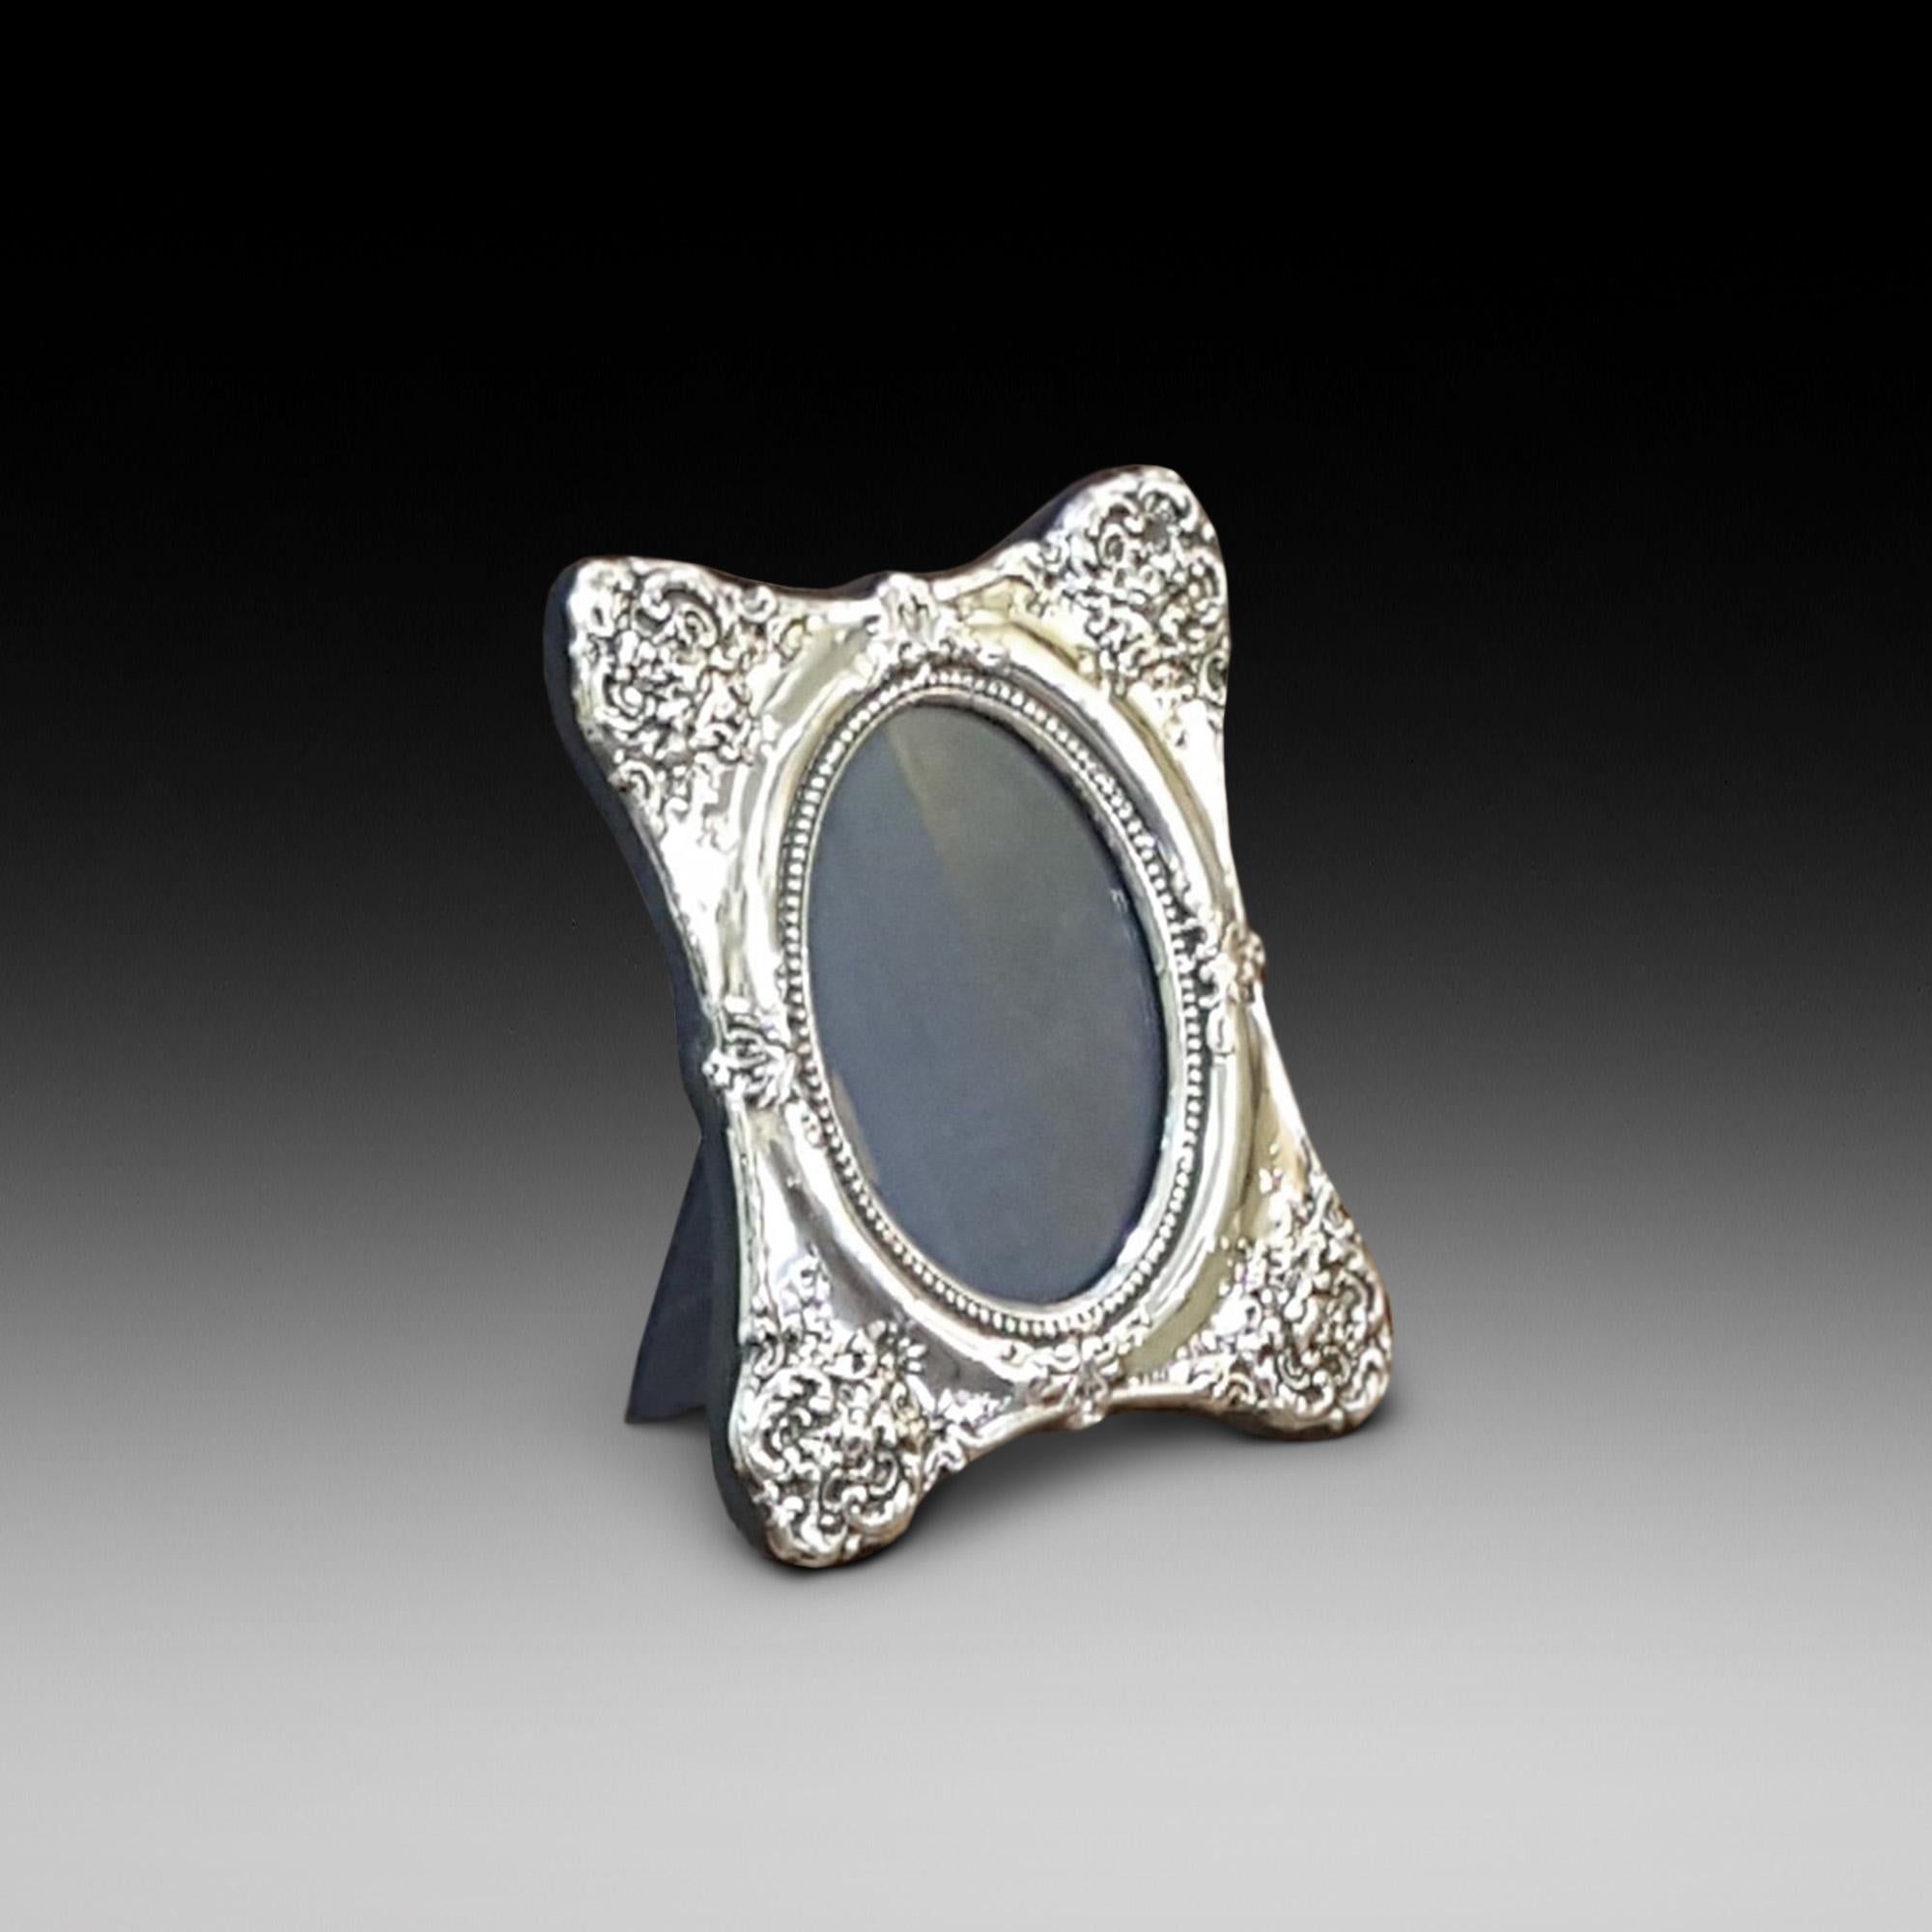 Edwardian silver picture frame with filigree decoration, Chester, 1916.
Measures: 6